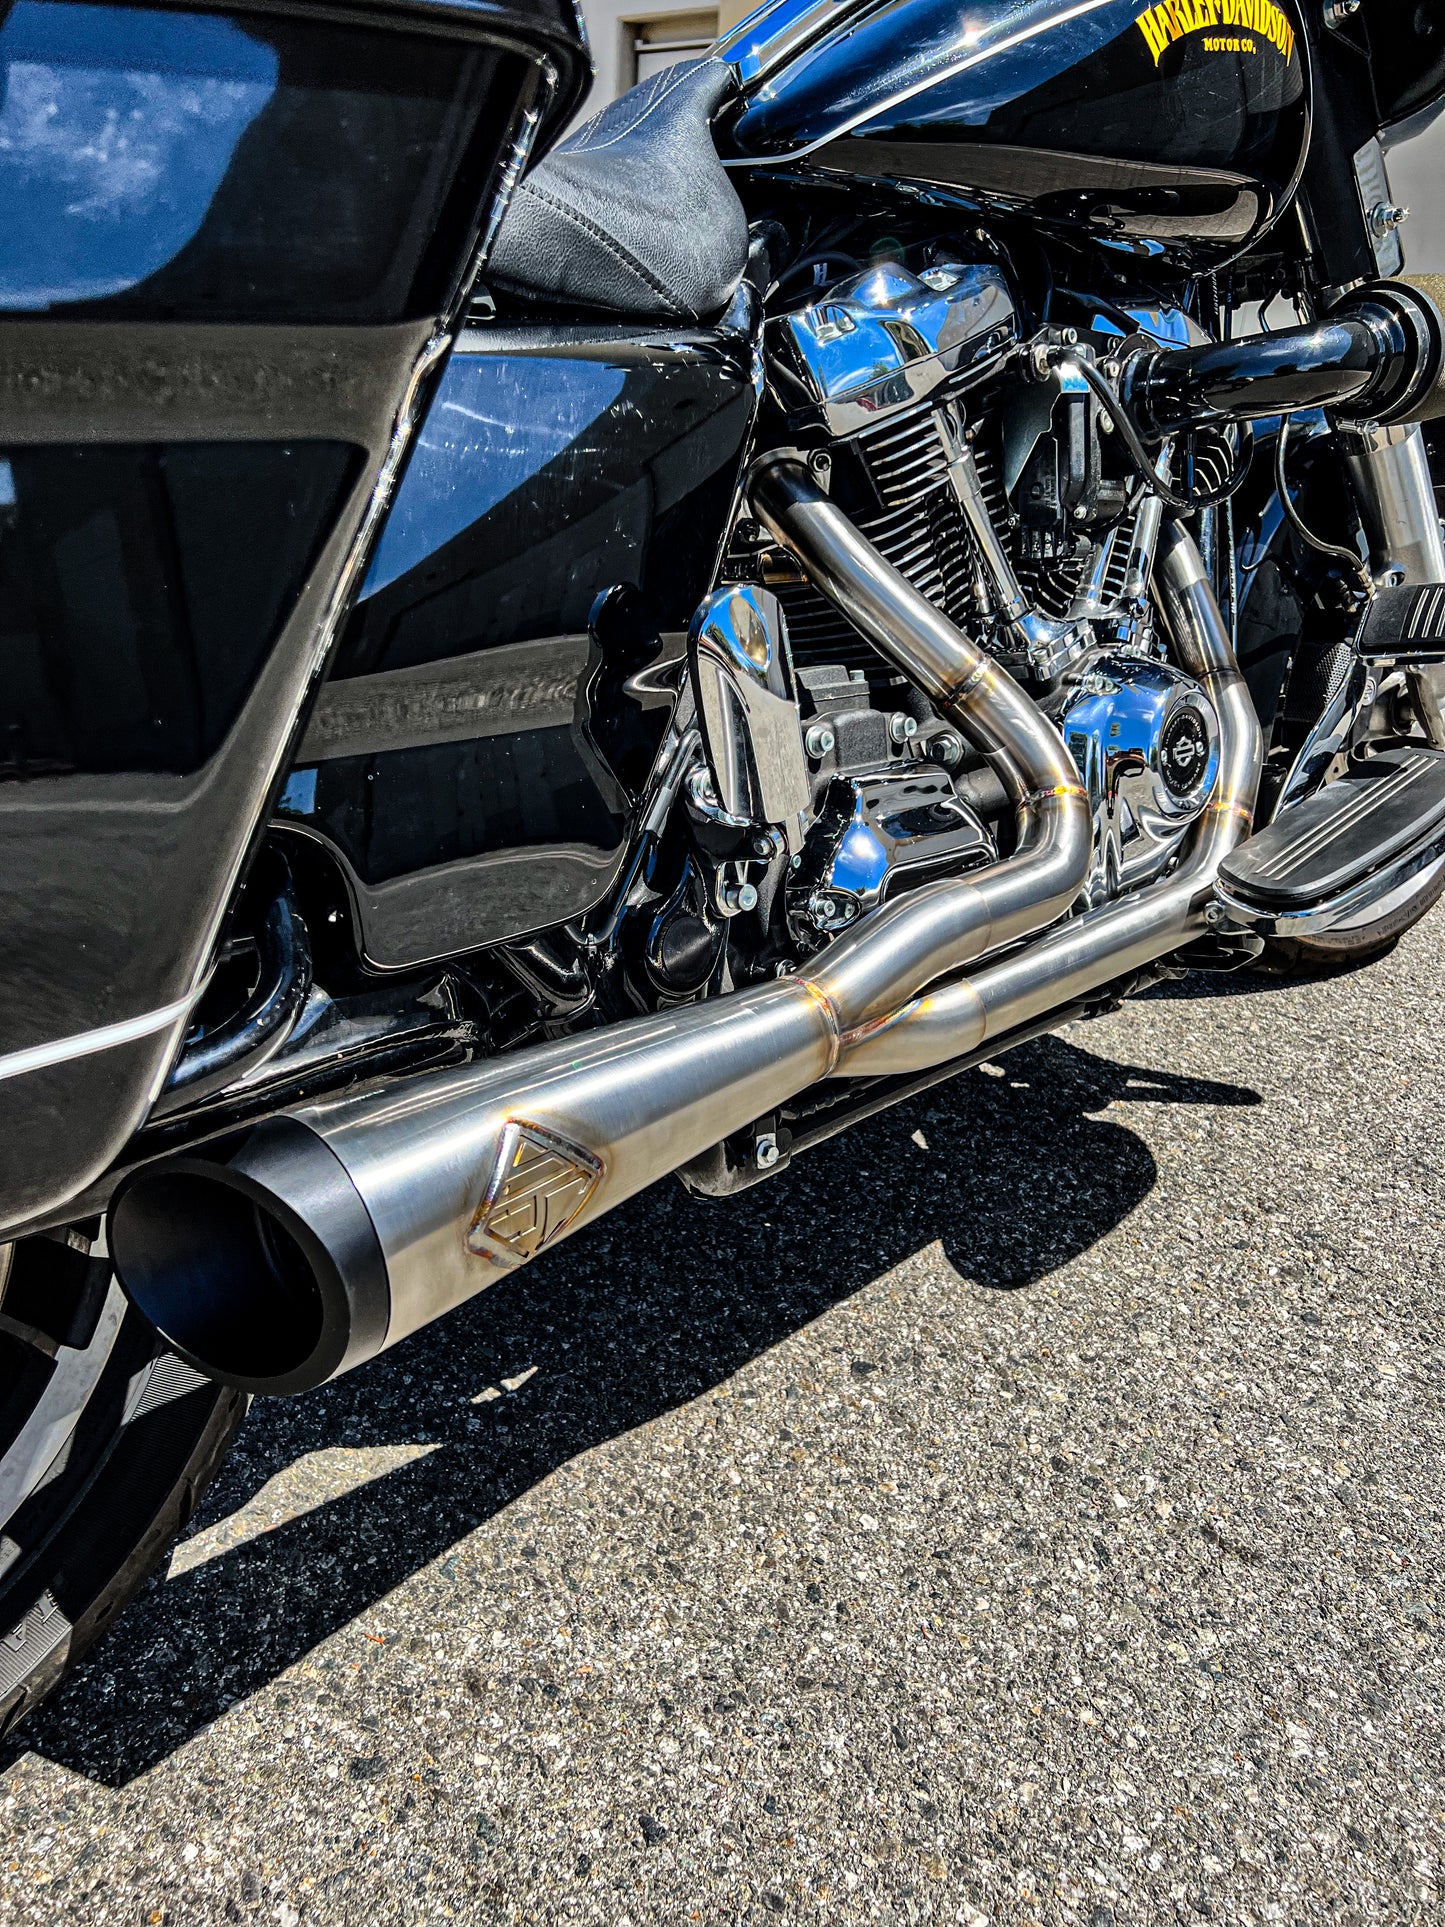 Stainless steel Cutback Exhaust close up on Harley Davidson M8 Bagger Motorcycle